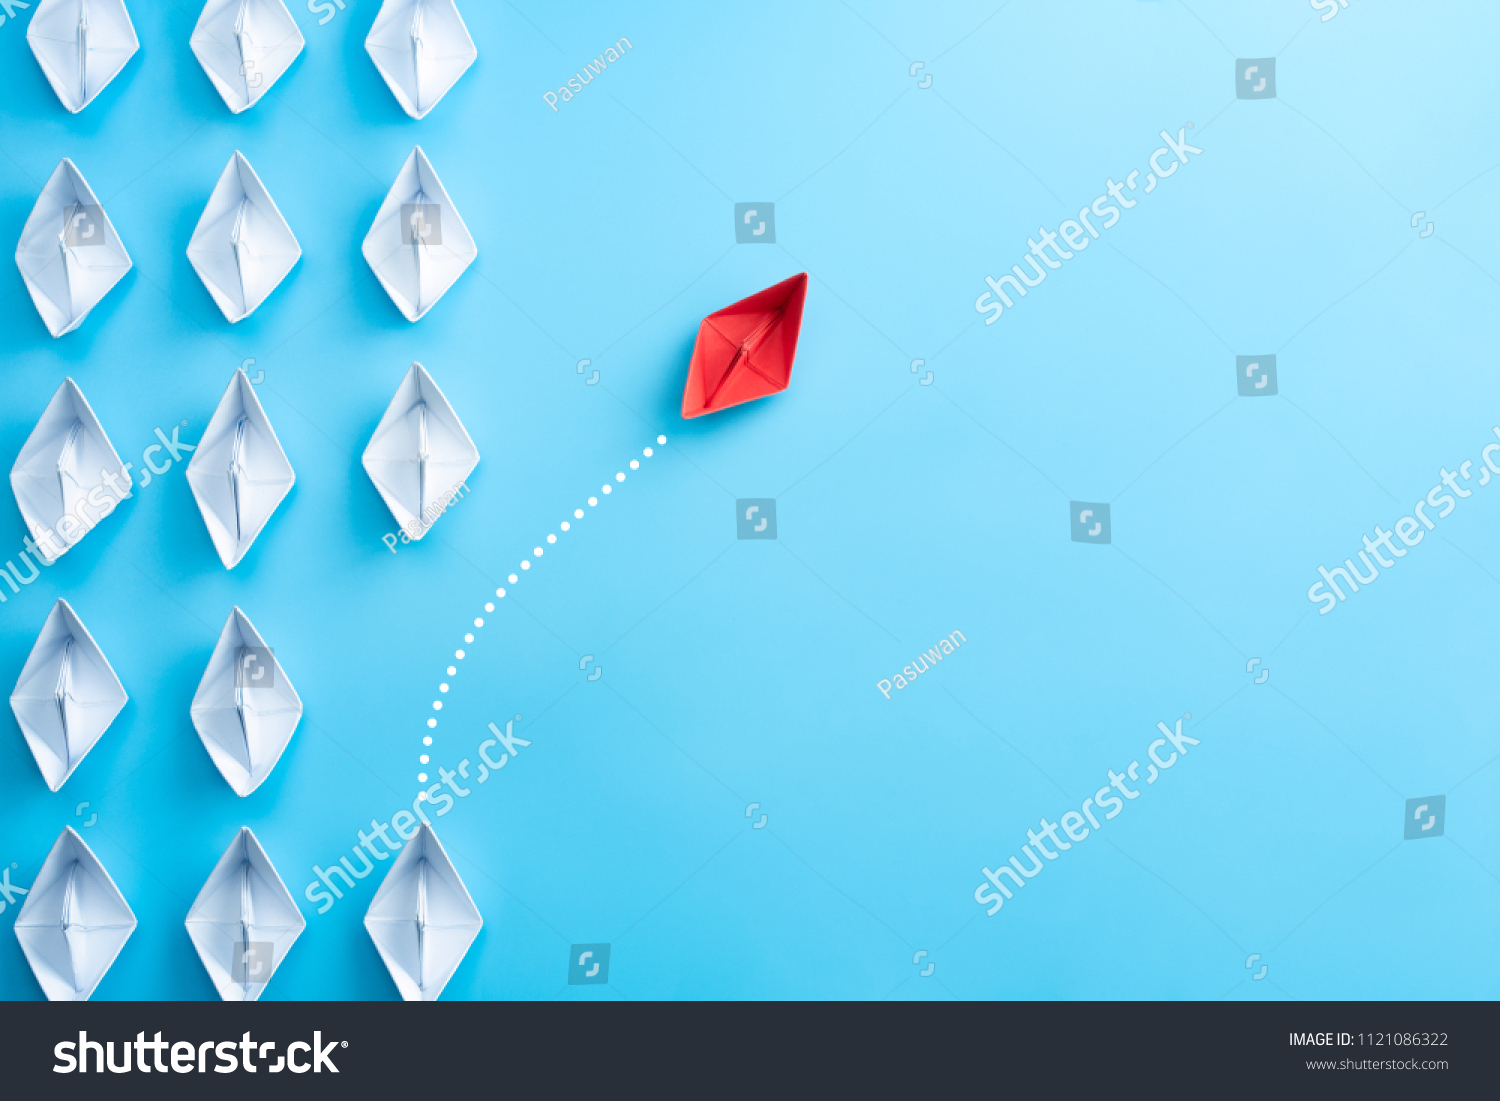 Group of white paper ship in one direction and one red paper ship pointing in different way on blue background. Business for innovative solution concept. #1121086322